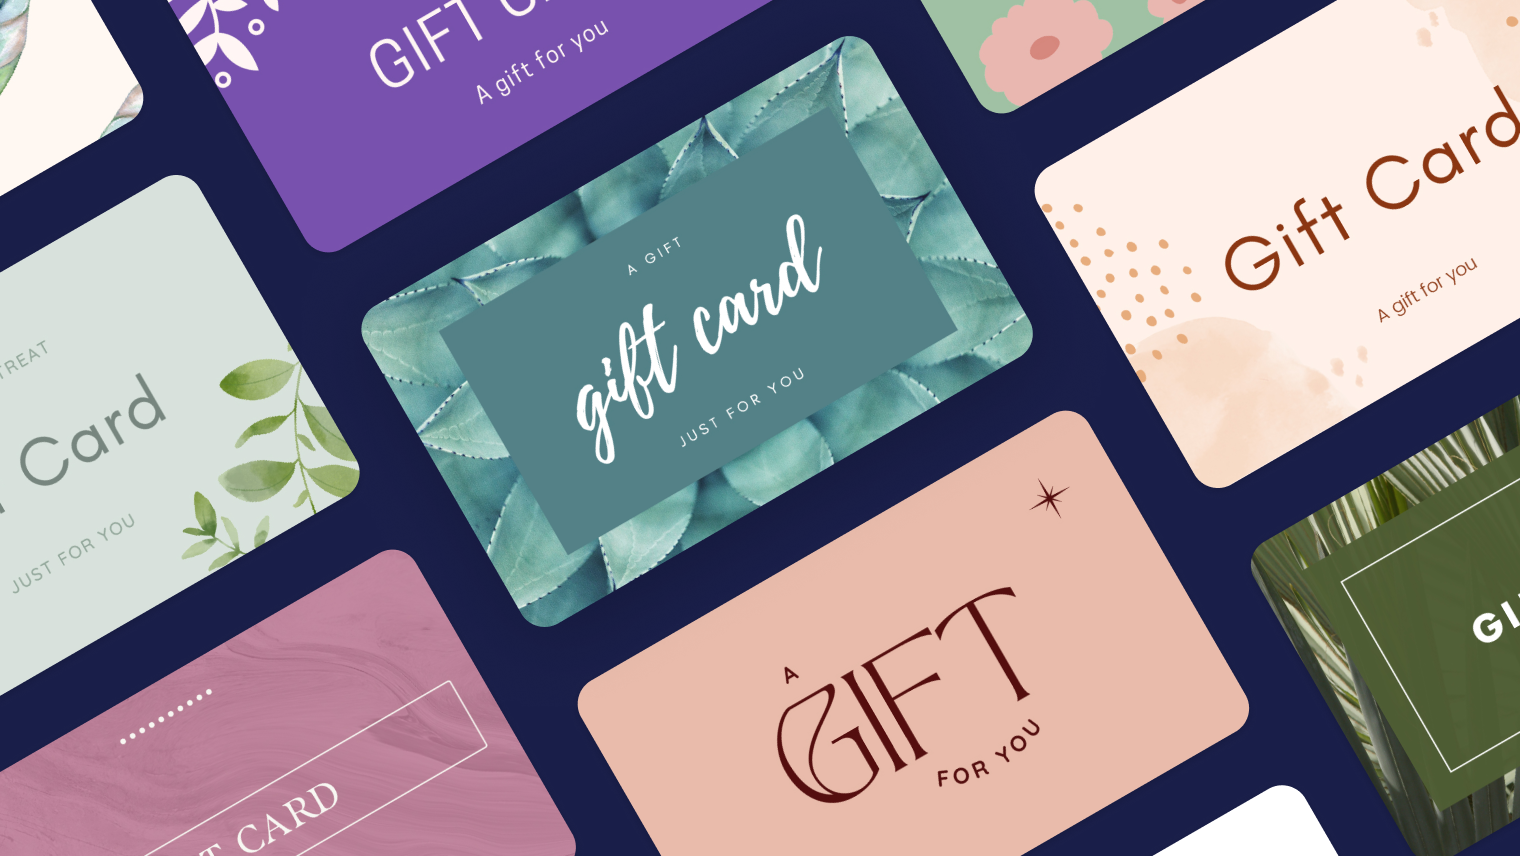 A new way to sell gift cards online